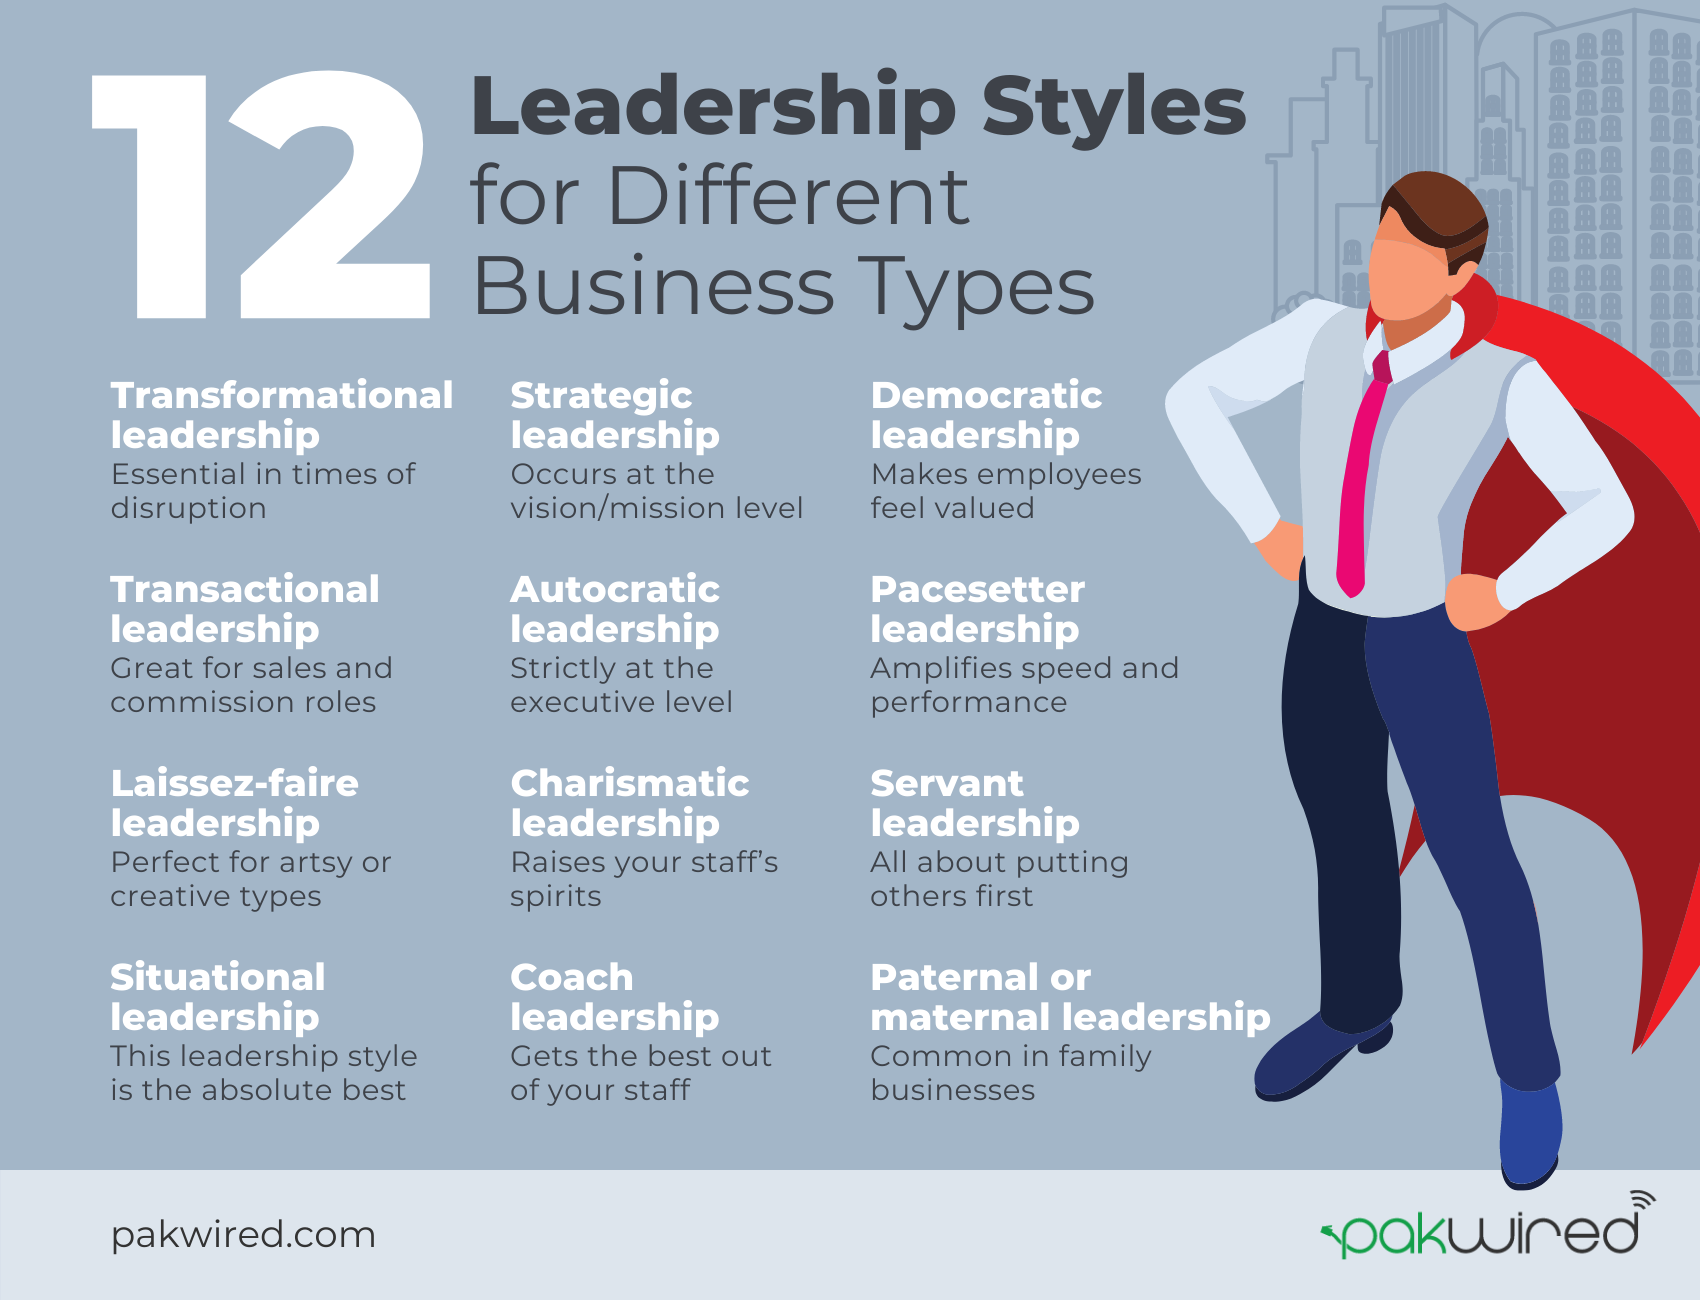 what are the different leadership styles? 2